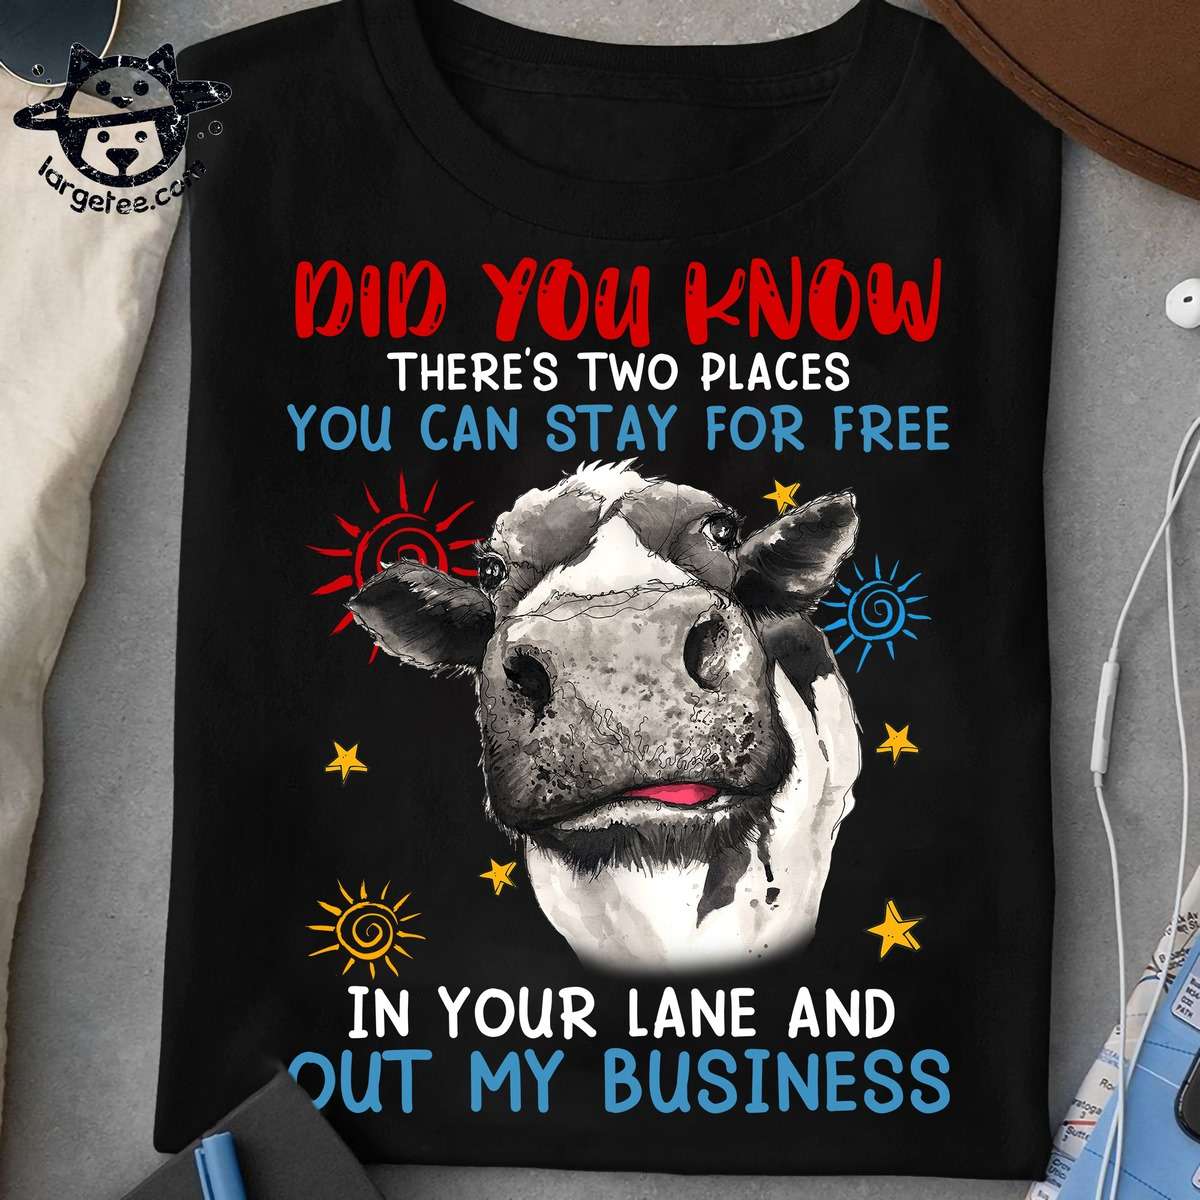 Did you know there's two places you can stay for free - In your lane and out my business, milk cow